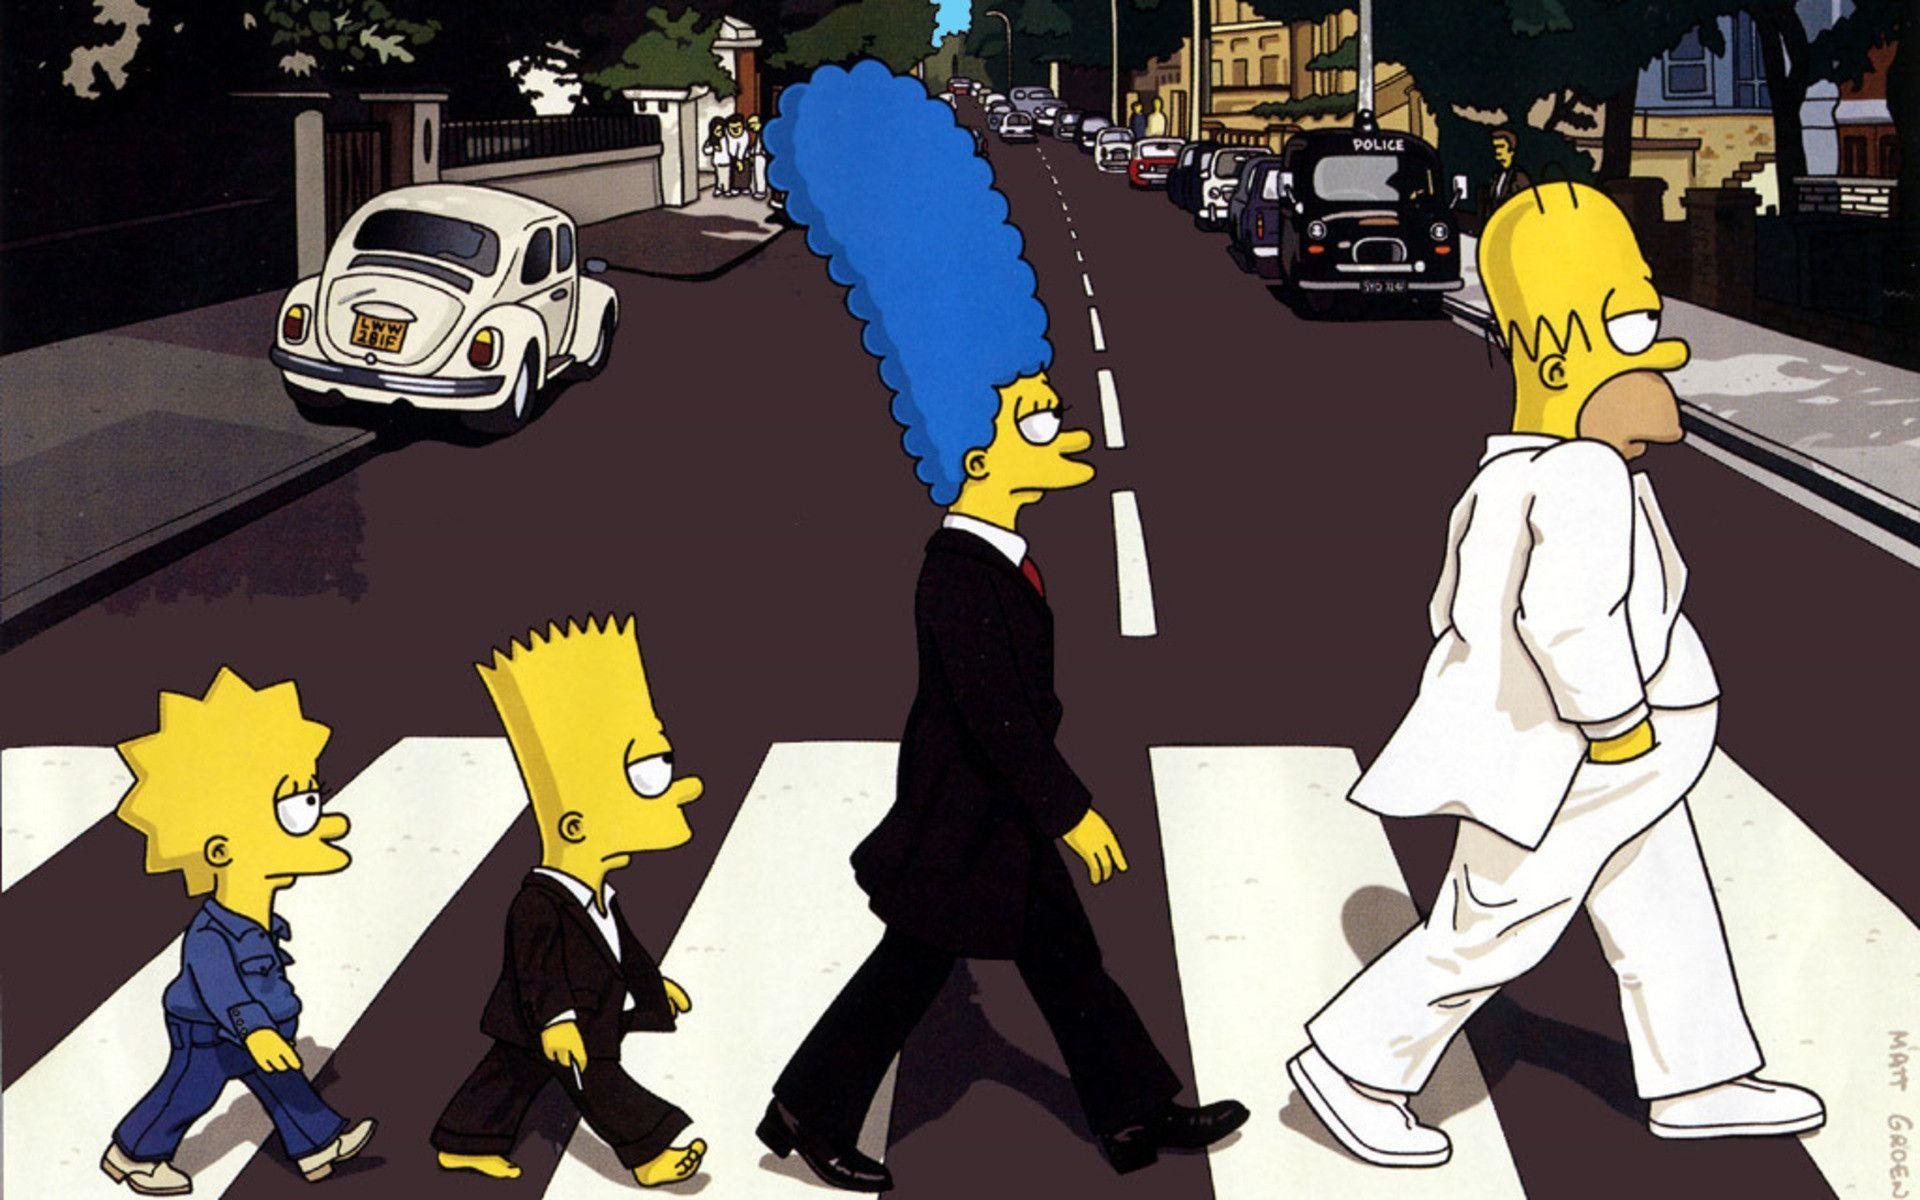 1920x1200 Simpsons - Wallpapers HD - Alucard - Goticismo, Imagens e Wallpapers